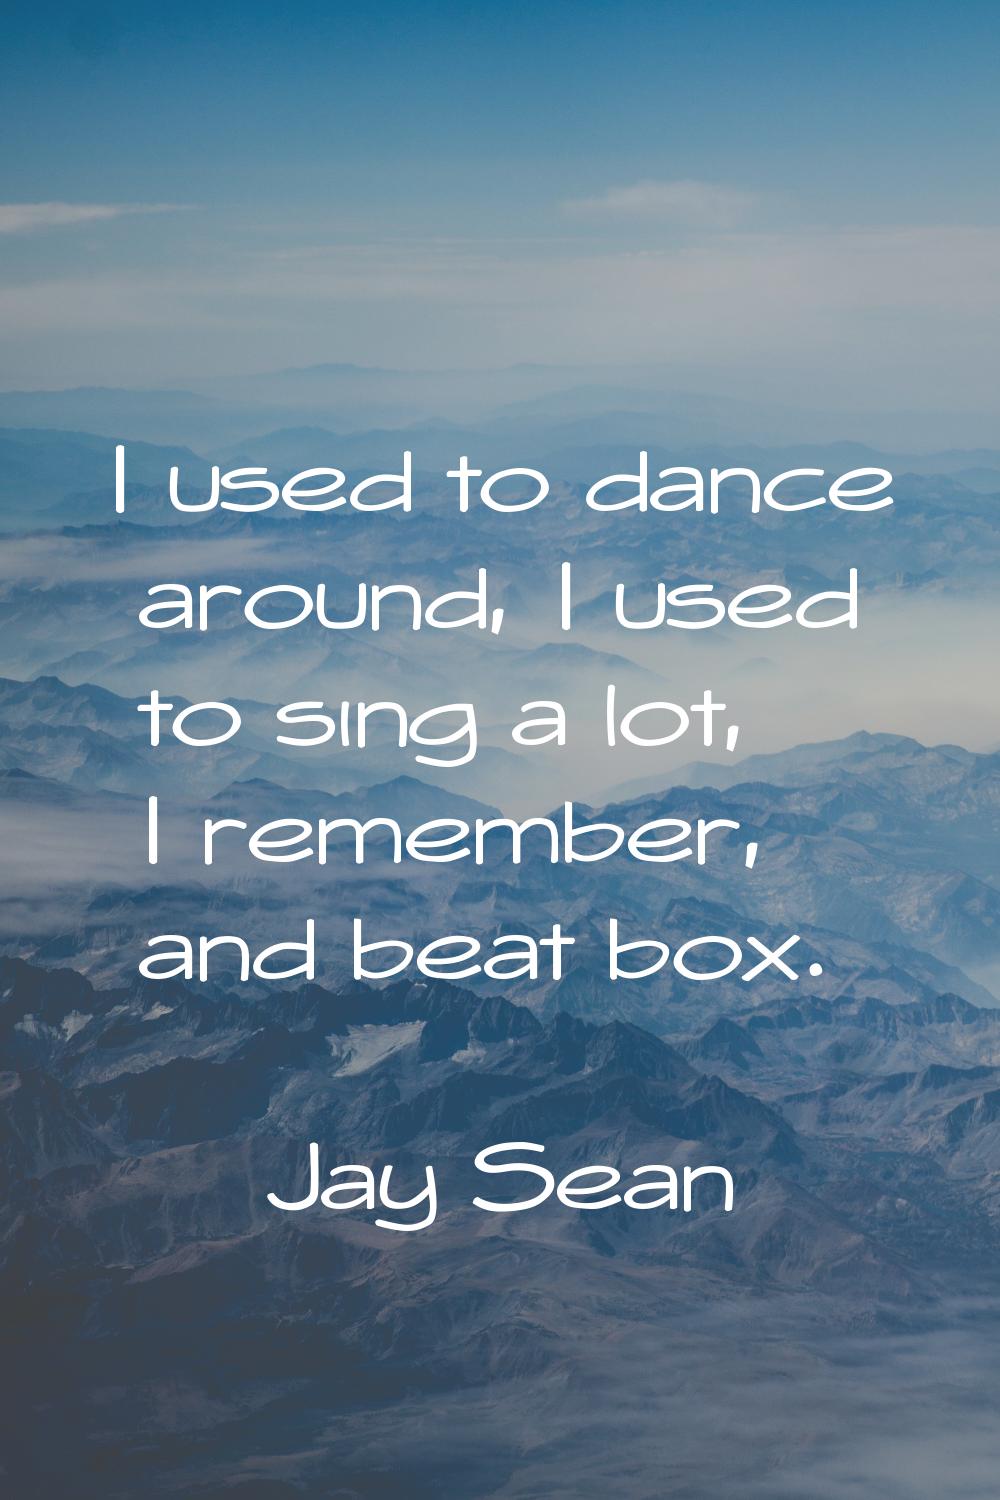 I used to dance around, I used to sing a lot, I remember, and beat box.